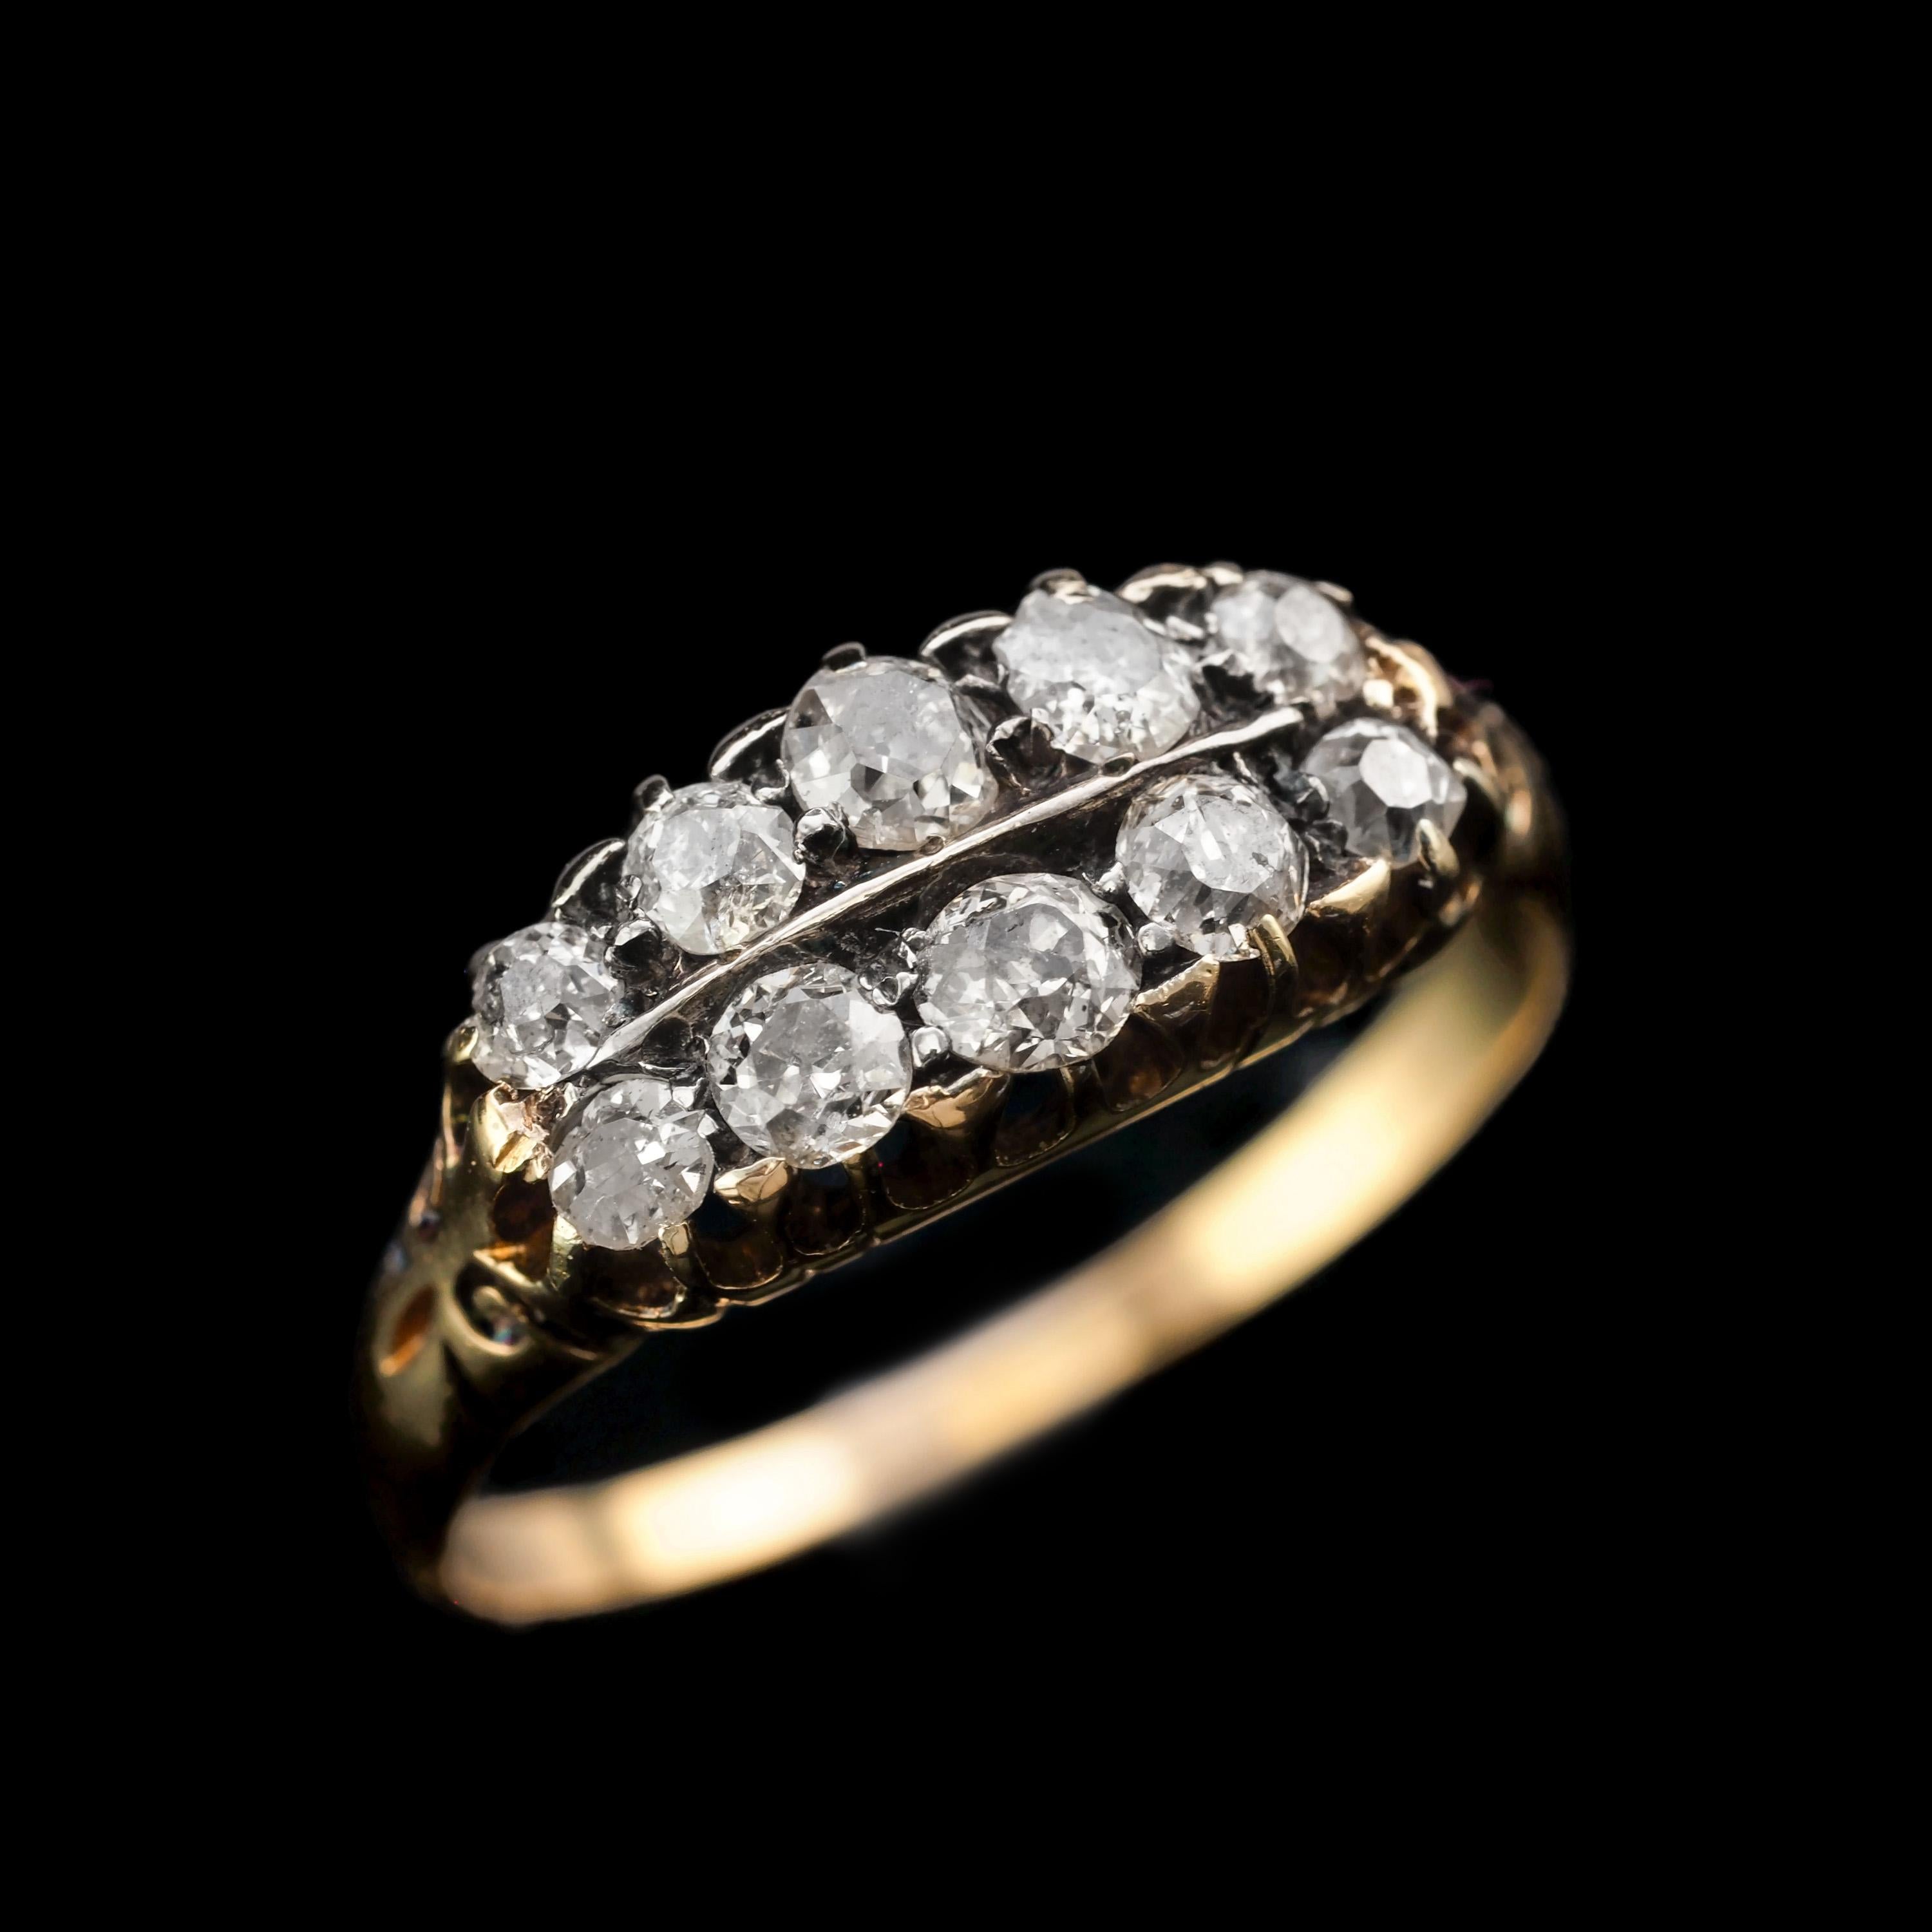 Antique Victorian 18K Gold Diamond Ring Old Cut - Boat Shaped c.1890 For Sale 8